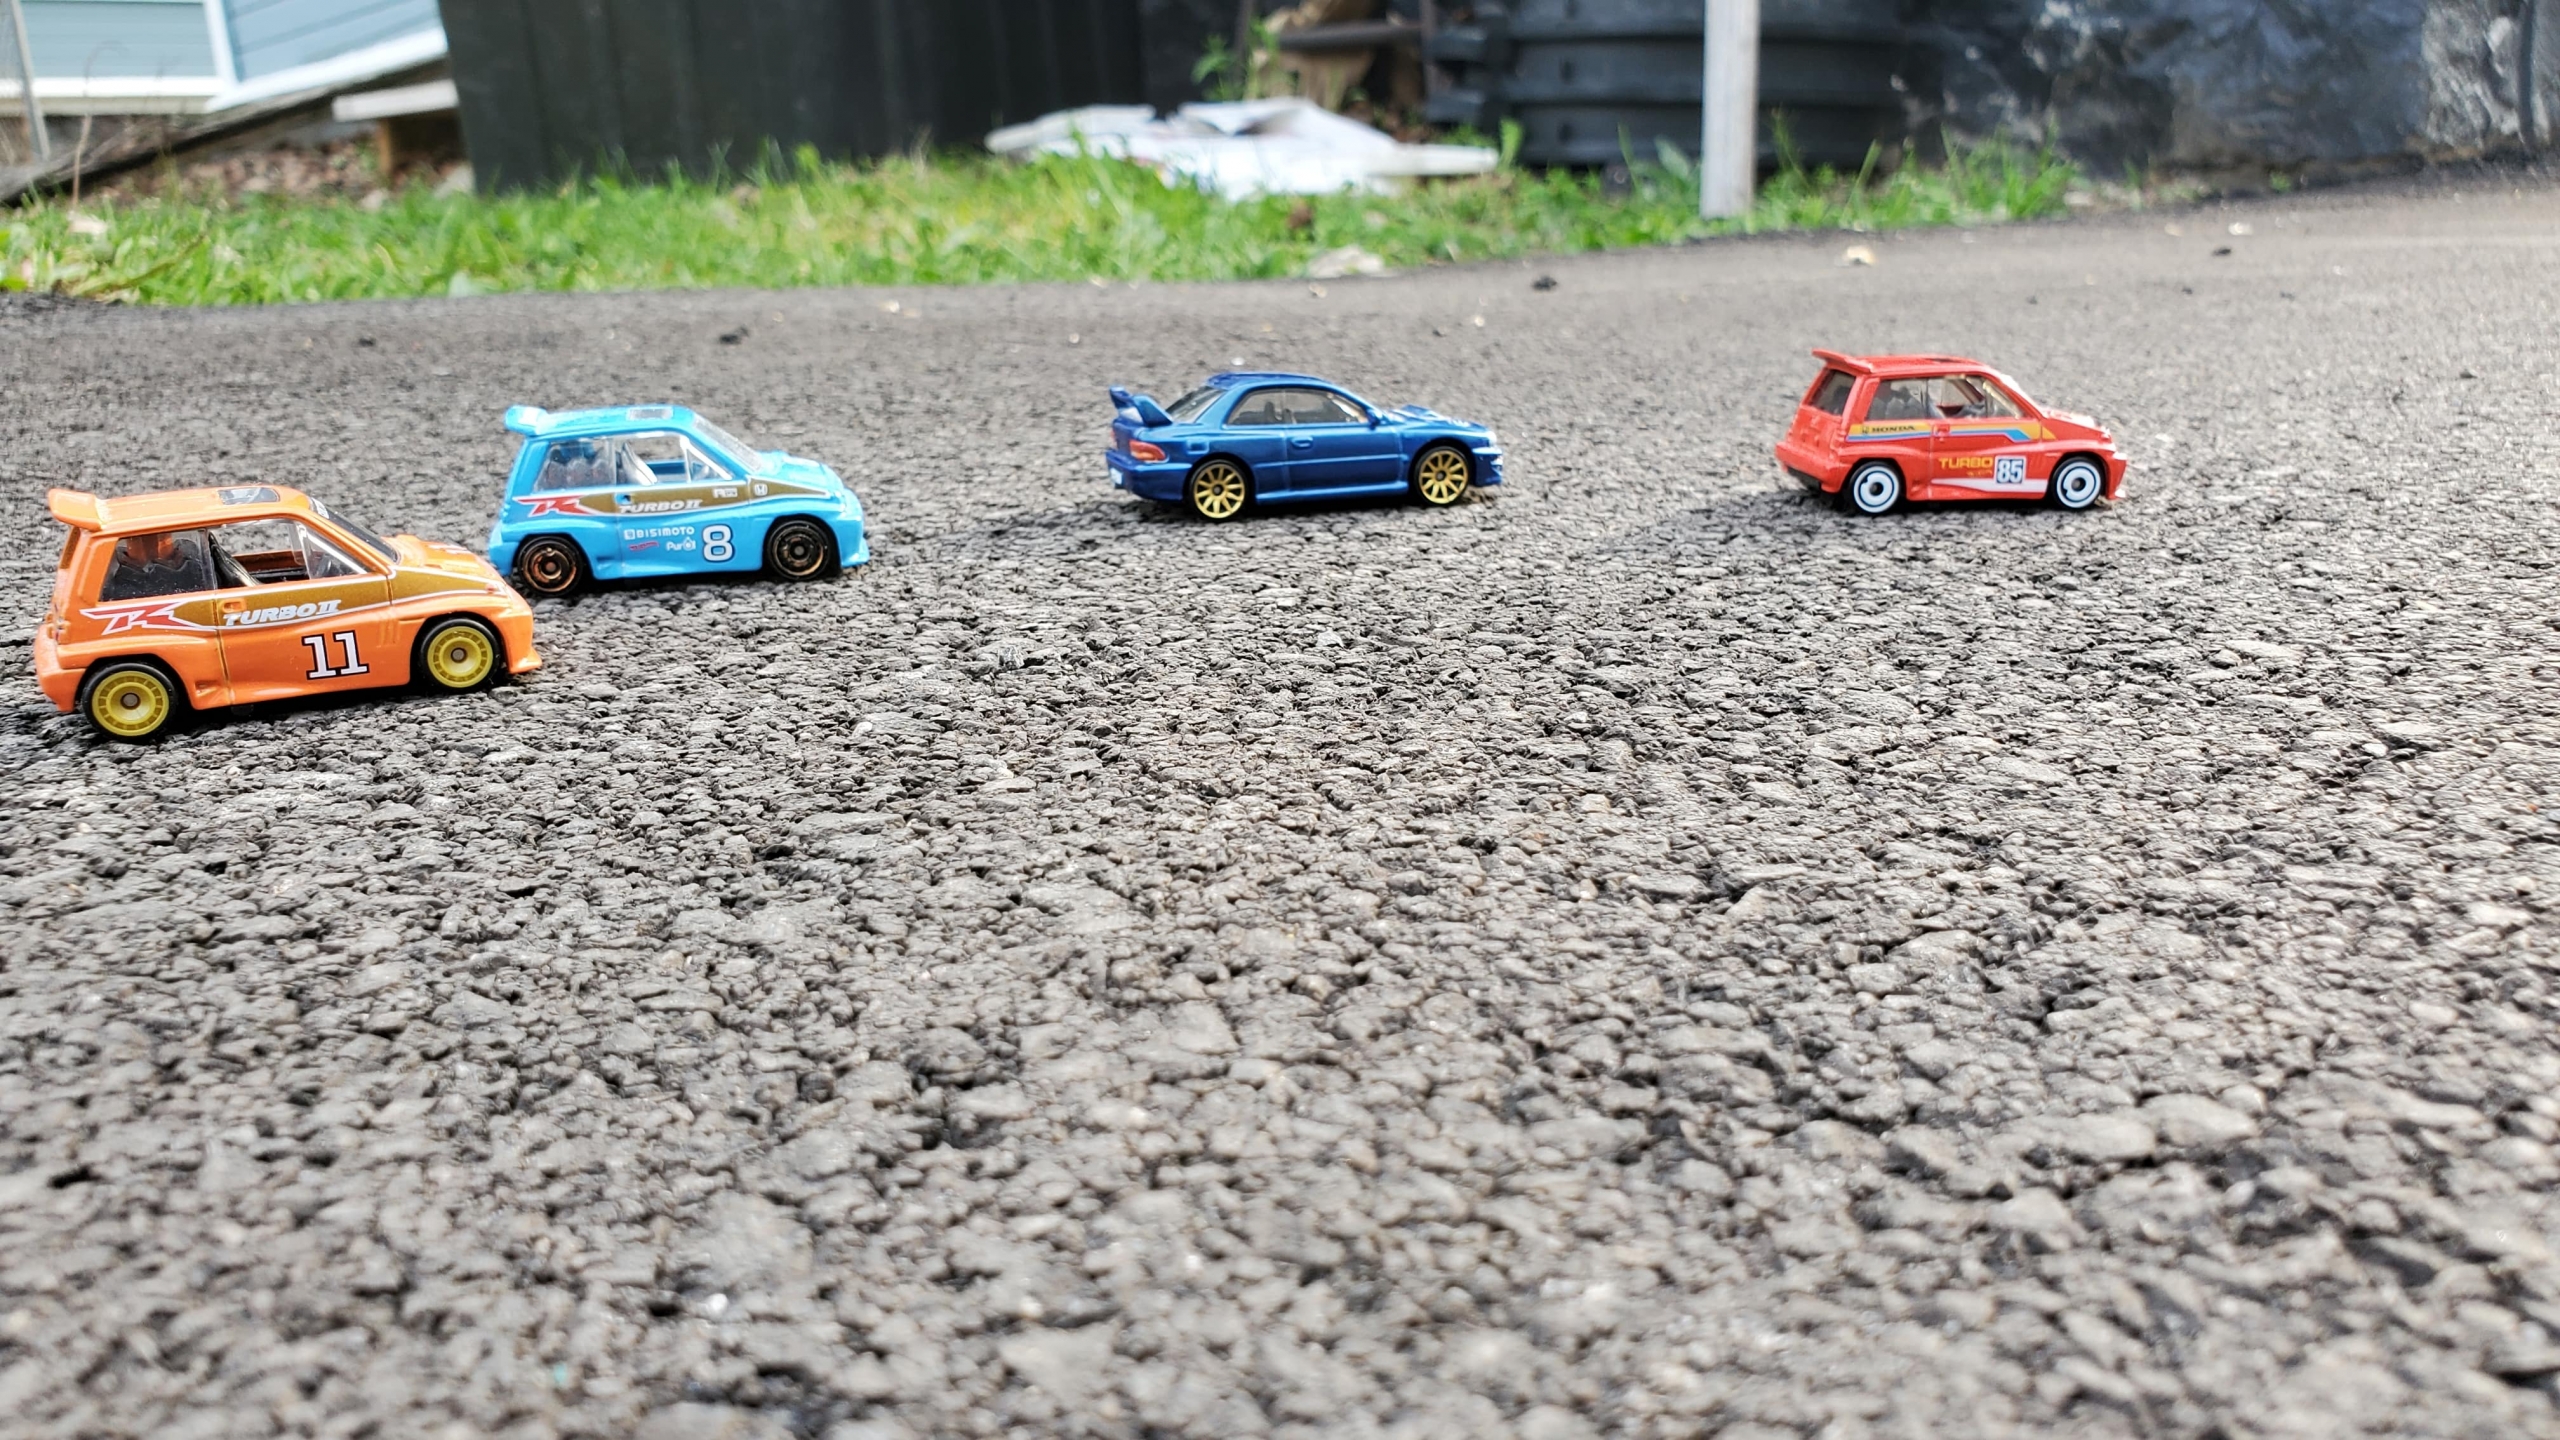 Toy racing cars